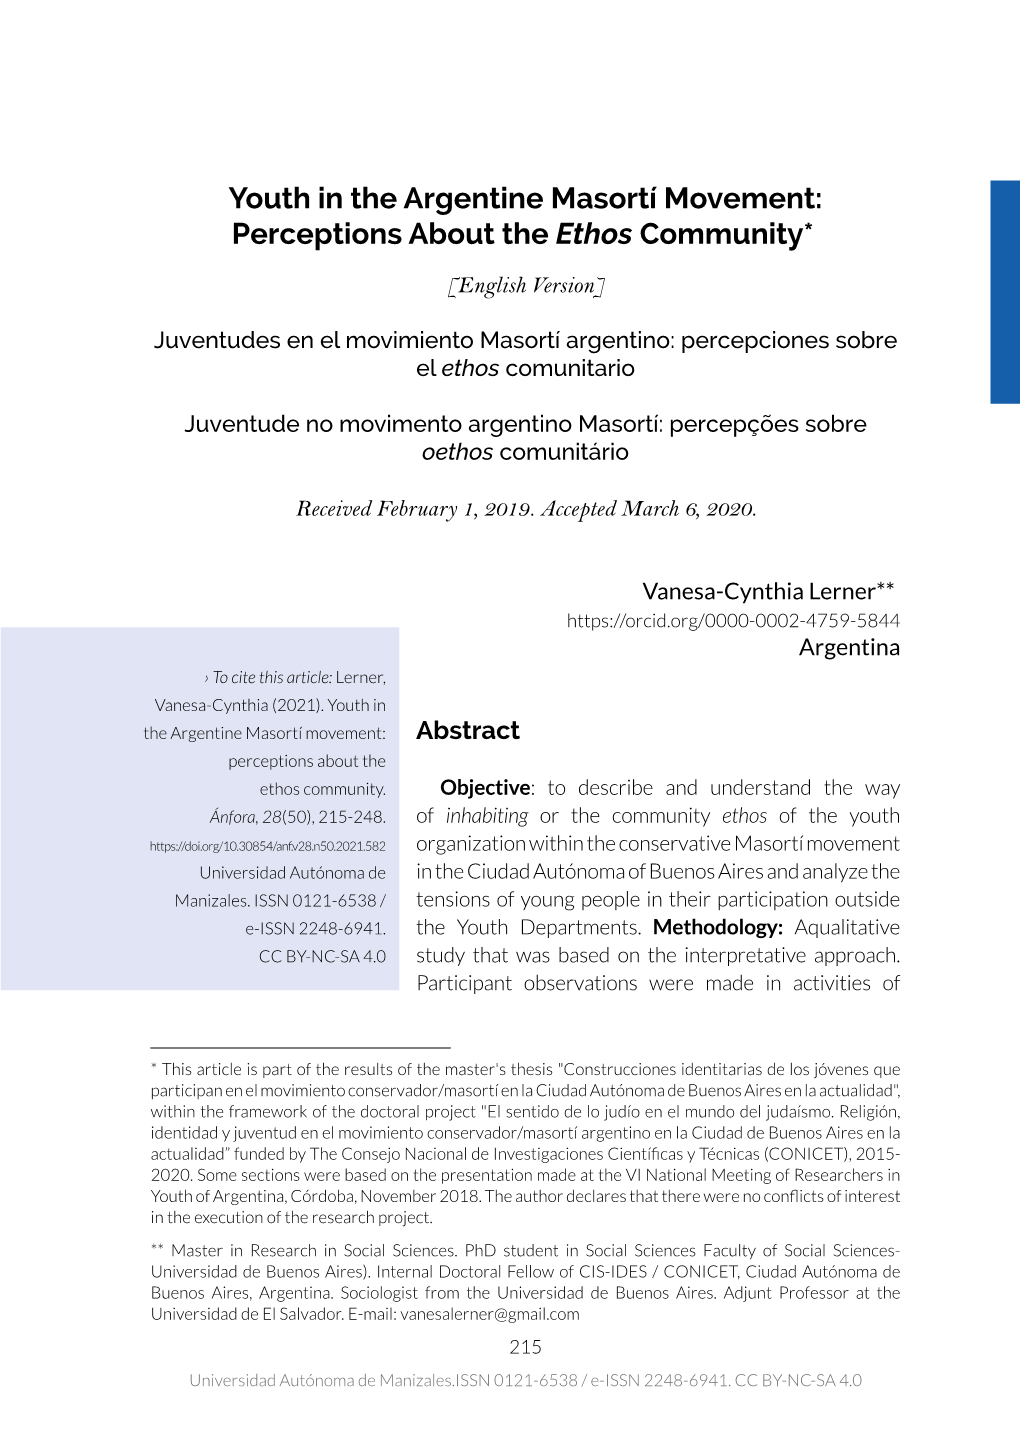 Youth in the Argentine Masortí Movement: Perceptions About the Ethos Community*1